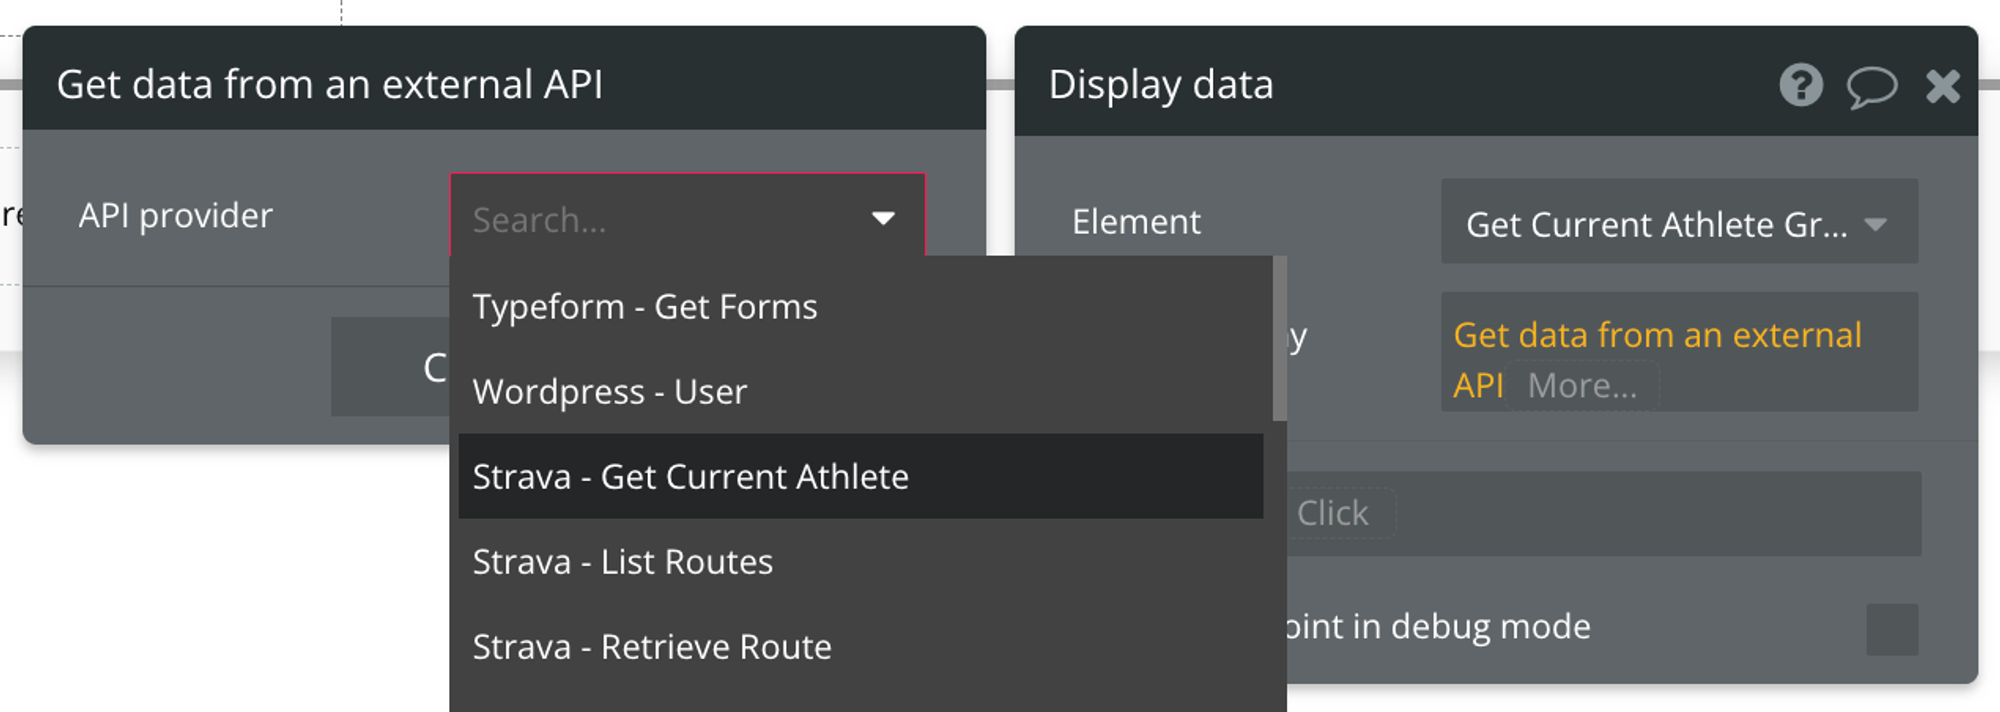 Select "Get data from external API" from the list of data sources, then find Strava - Get Current Athlete from the list of API providers